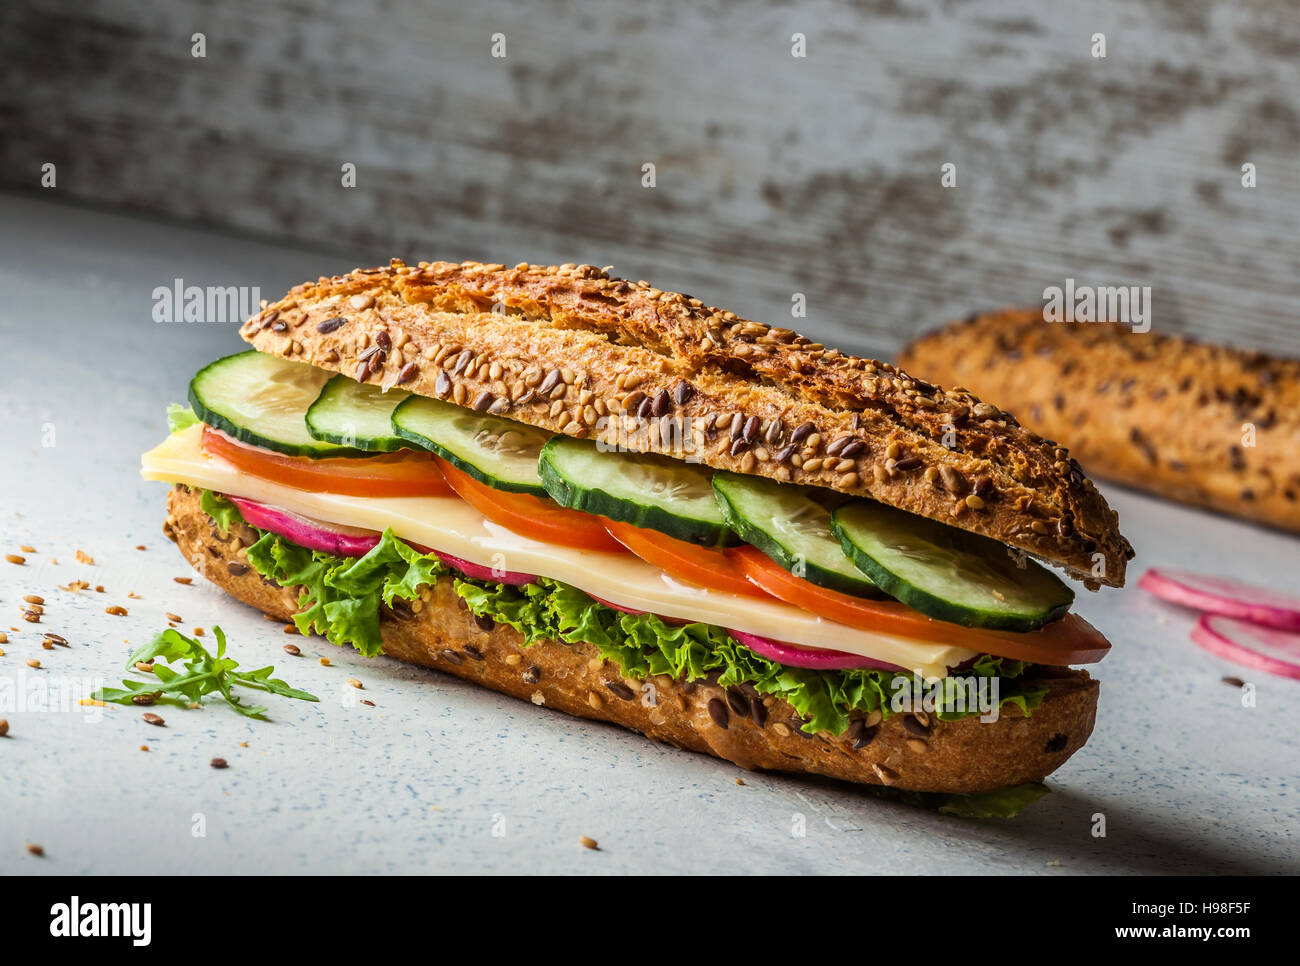 Sandwich with cheese, tomato, cucumber, radish and lettuce. Dark and moody. Stock Photo